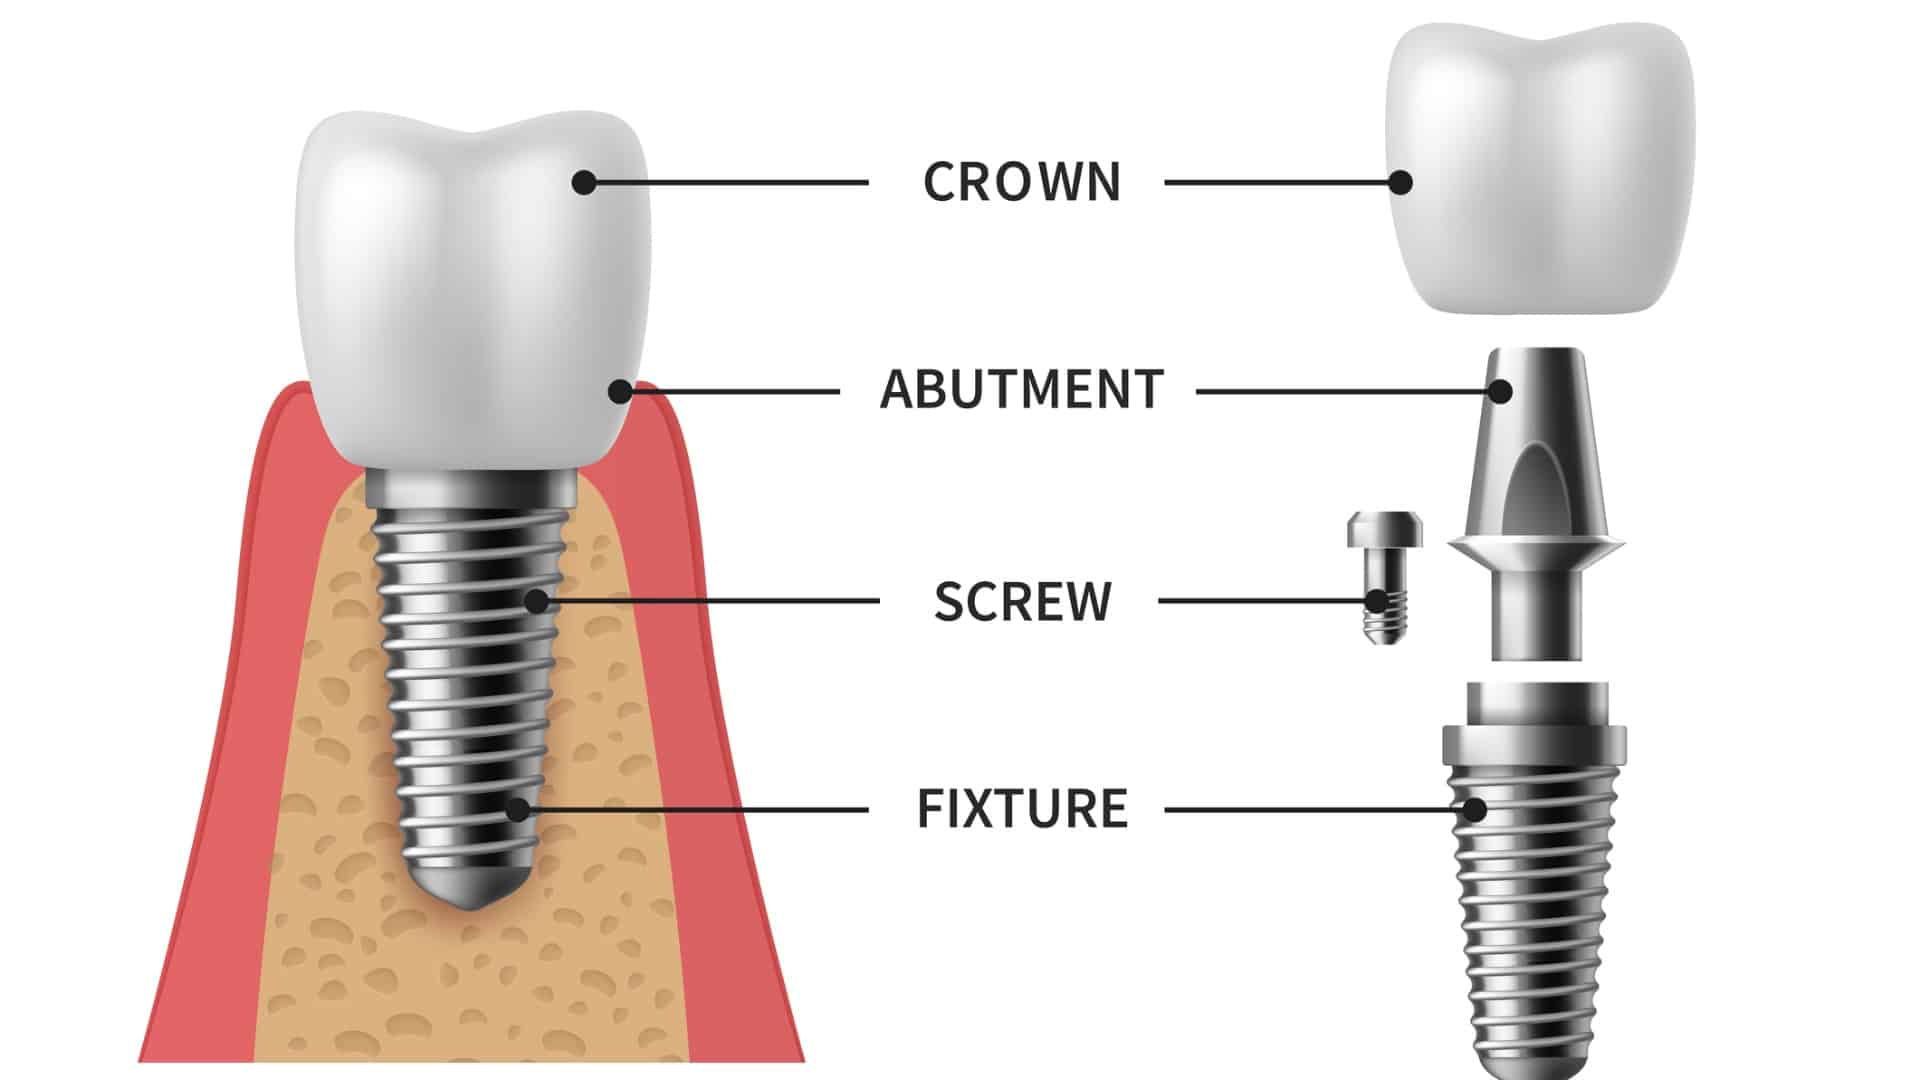 tooth-implant-realistic-implant-structure-pictorial-models-crown-vector-id1251576368 (5) (1)